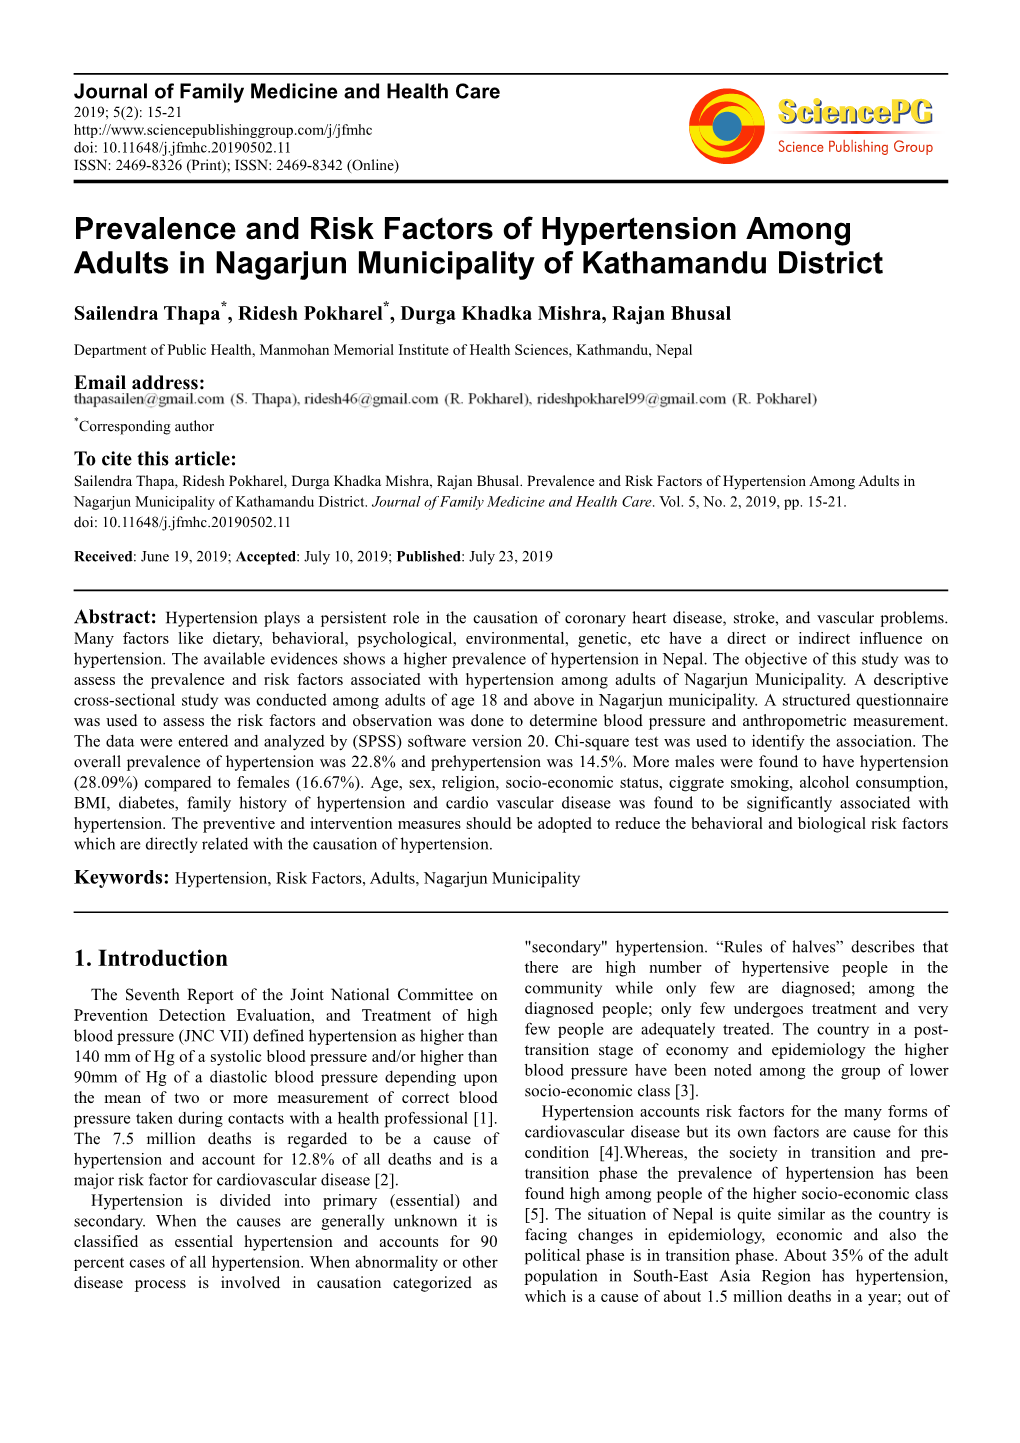 Prevalence and Risk Factors of Hypertension Among Adults in Nagarjun Municipality of Kathamandu District